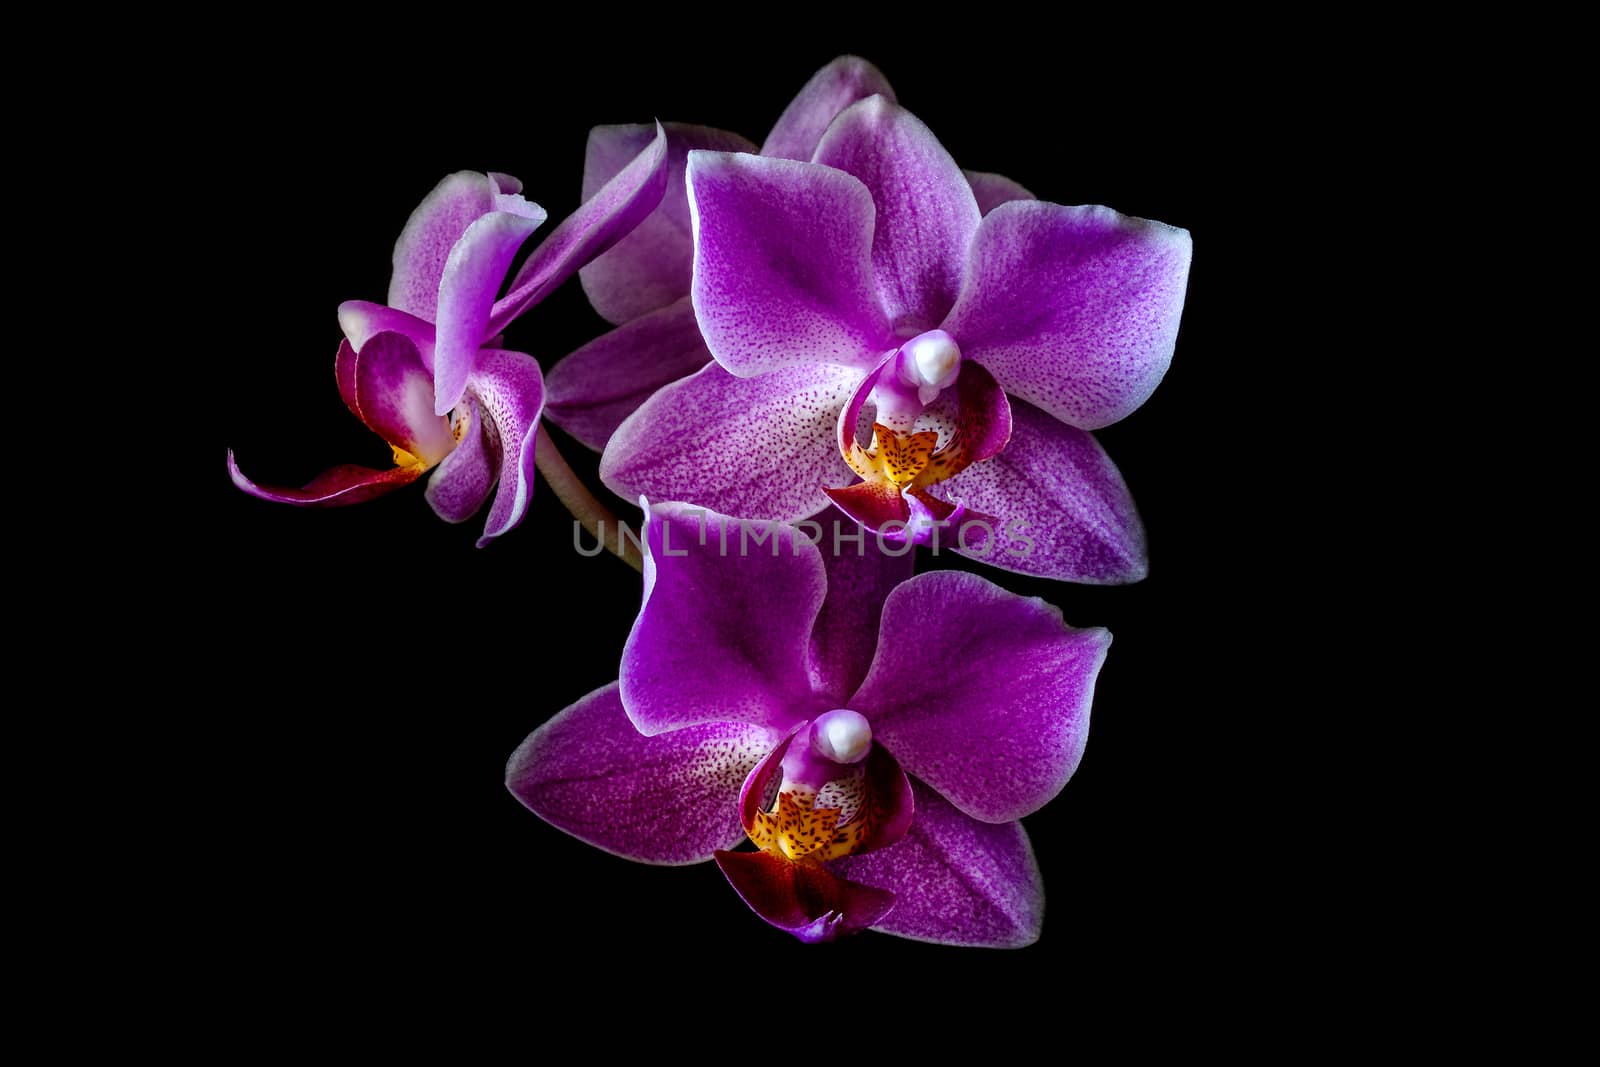 blooms of purple orchid on black background